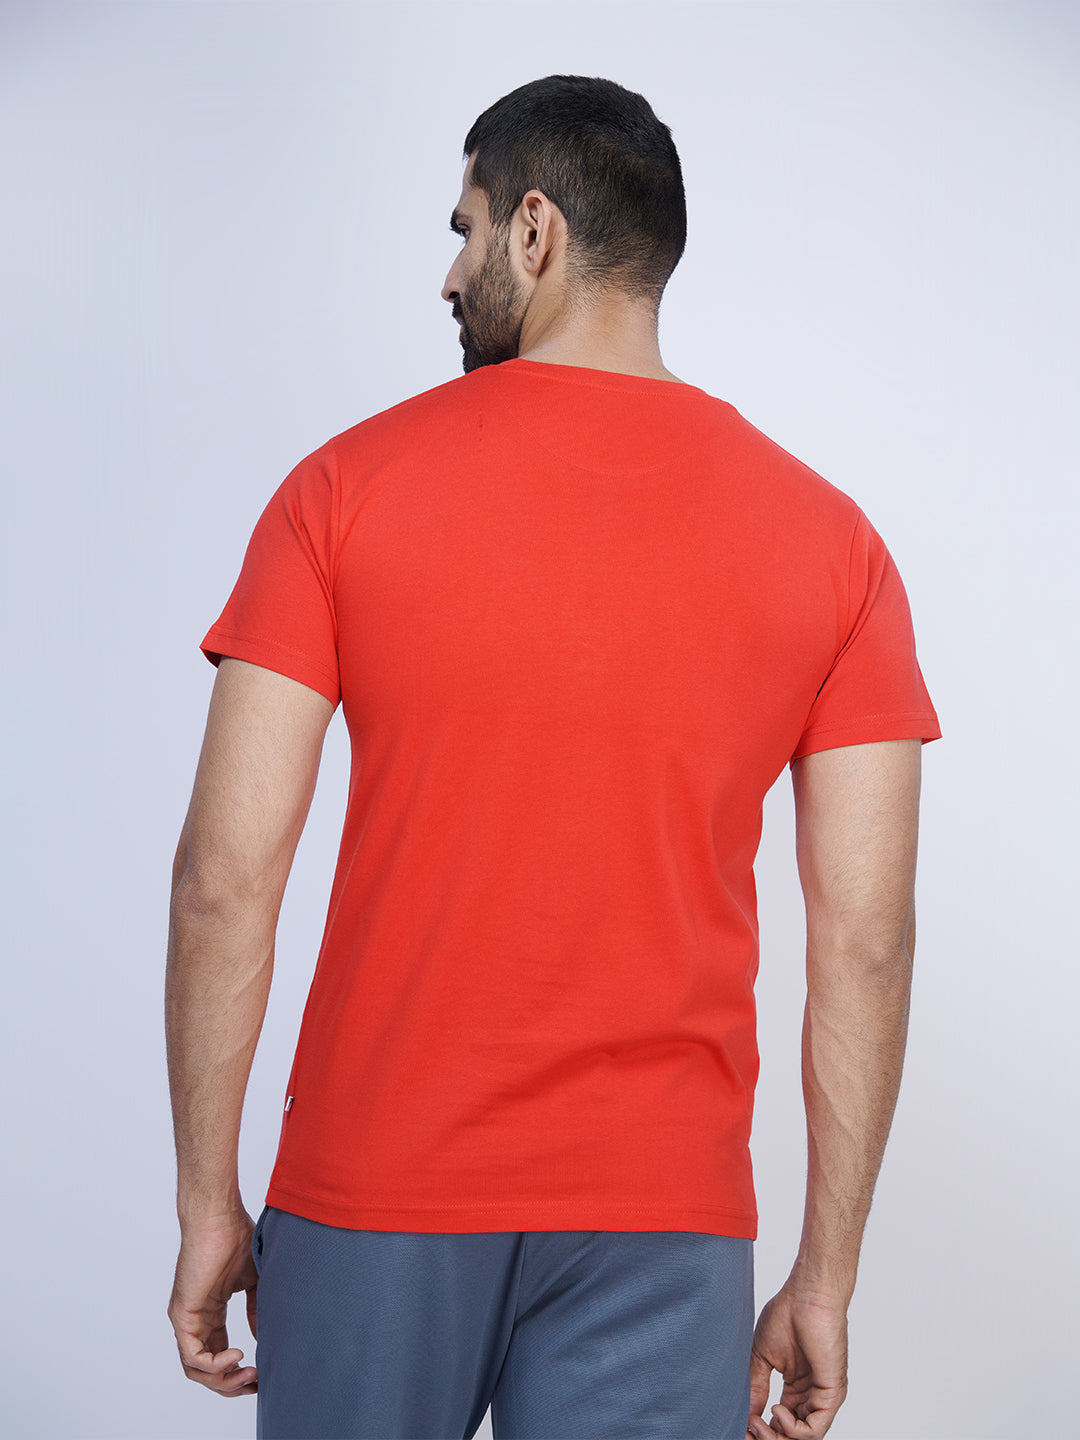 Red Graphic Printed Round Neck Casual T-Shirt GT48